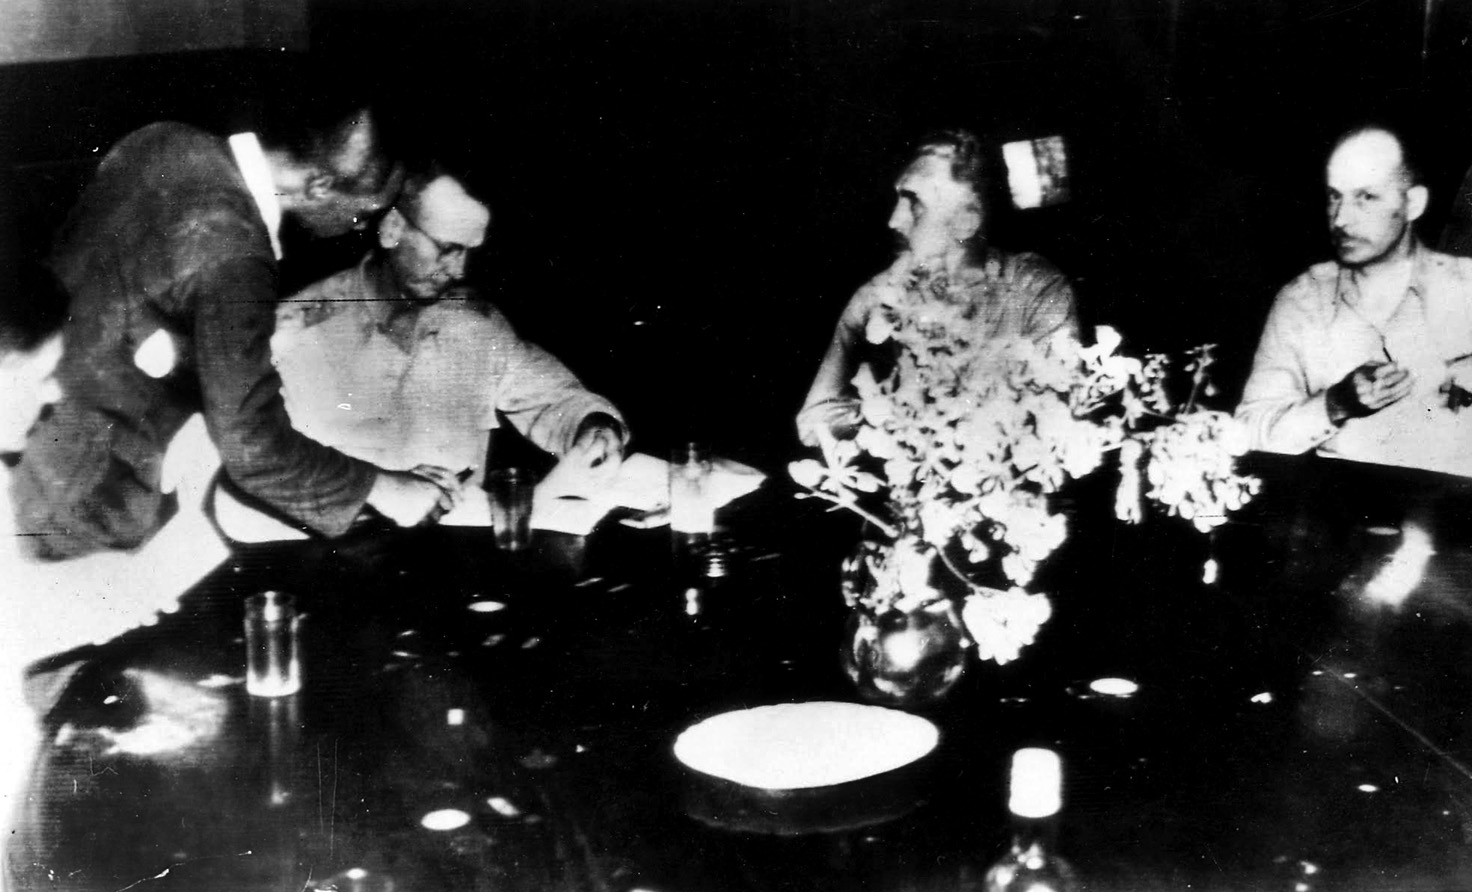 To complete the humiliation, Wainwright (left) and Galbraith (center) are forced to make a radio broadcast from Manila declaring the American surrender, May 8, 1942.